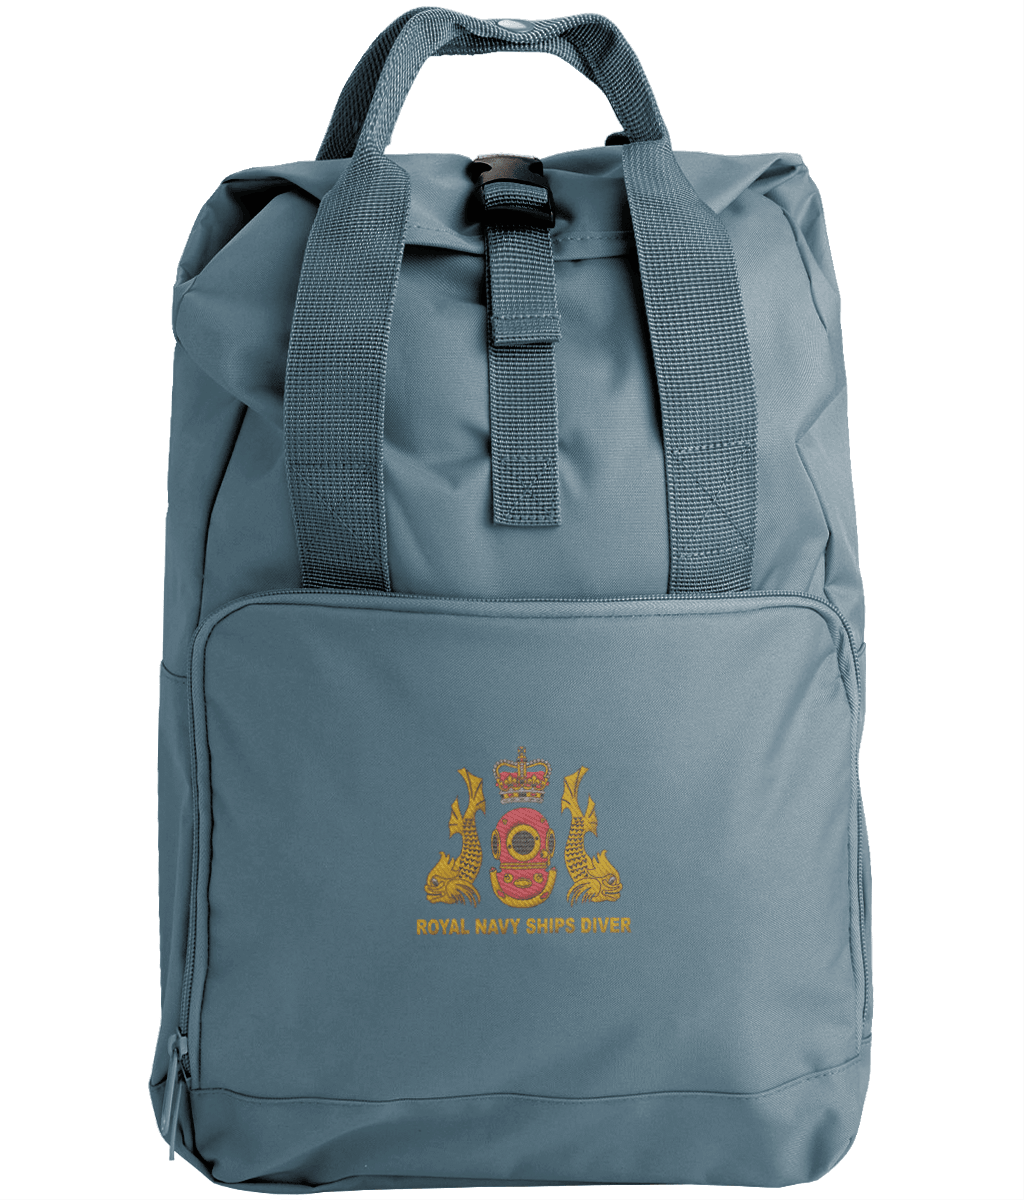 Royal Navy Ships Diver - Embroidered Twin Handle Roll-Top Backpack - Divers Gifts